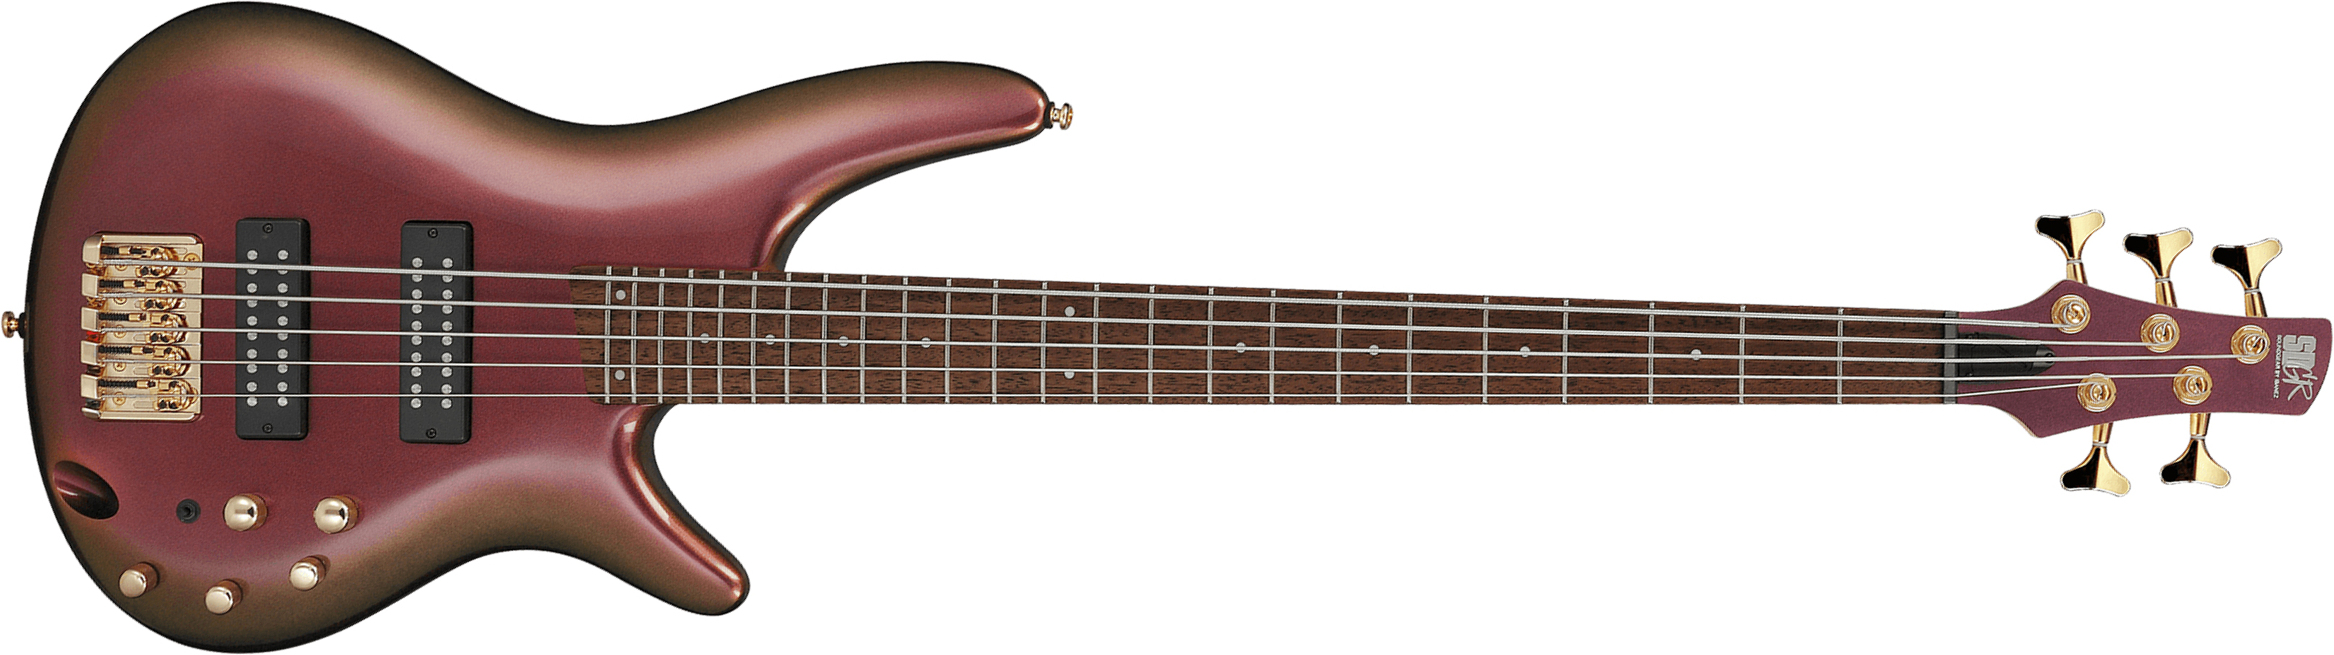 Ibanez Sr305edx Rgc Standard 5c Active Jat - Rose Gold Chameleon - Solid body electric bass - Main picture